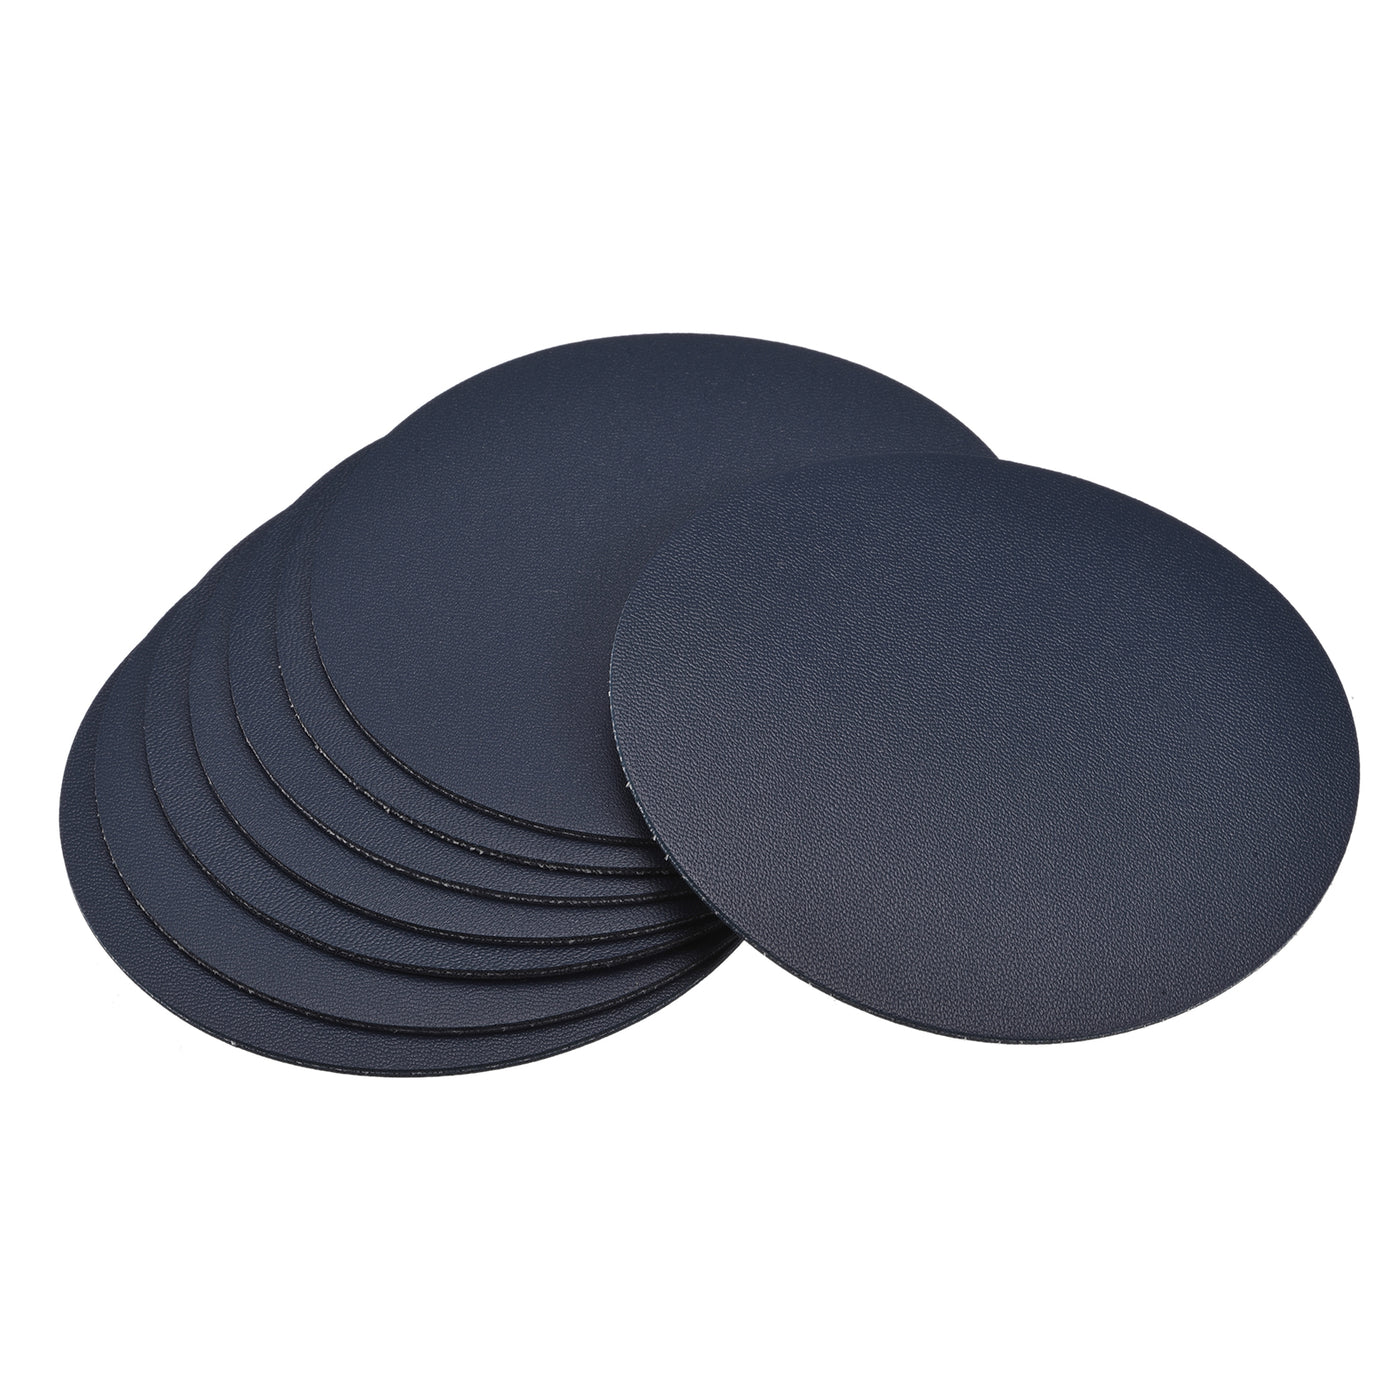 uxcell Uxcell 102mm(4.02") Round Coasters PU Cup Mat Pad for Tableware Dark Blue 8pcs